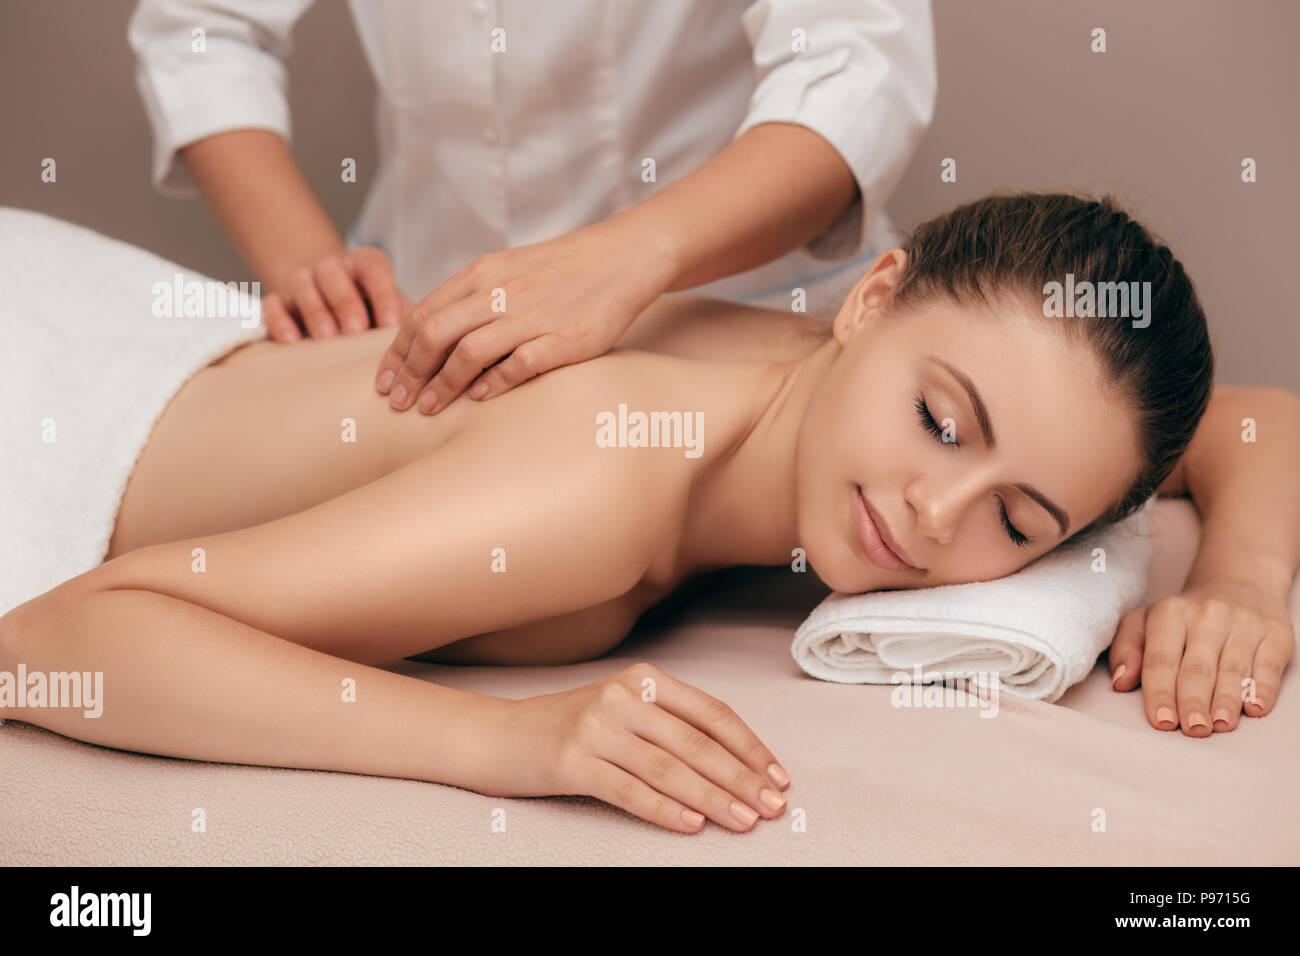 Young smiling woman receiving back massage from a massage professional at beauty salon Stock Photo